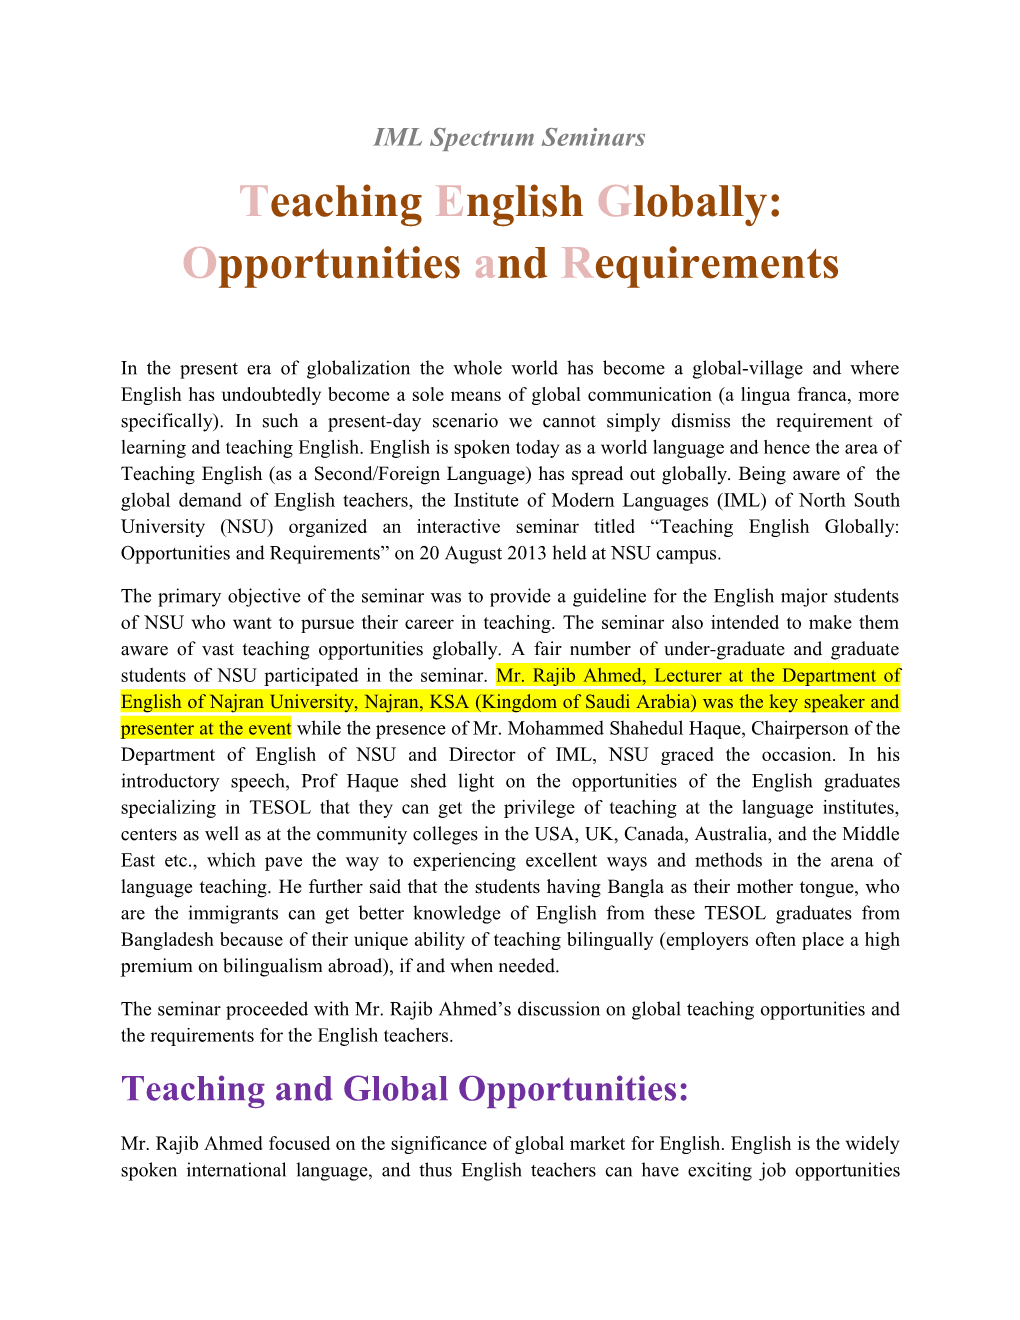 Teaching English Globally: Opportunities and Requirements